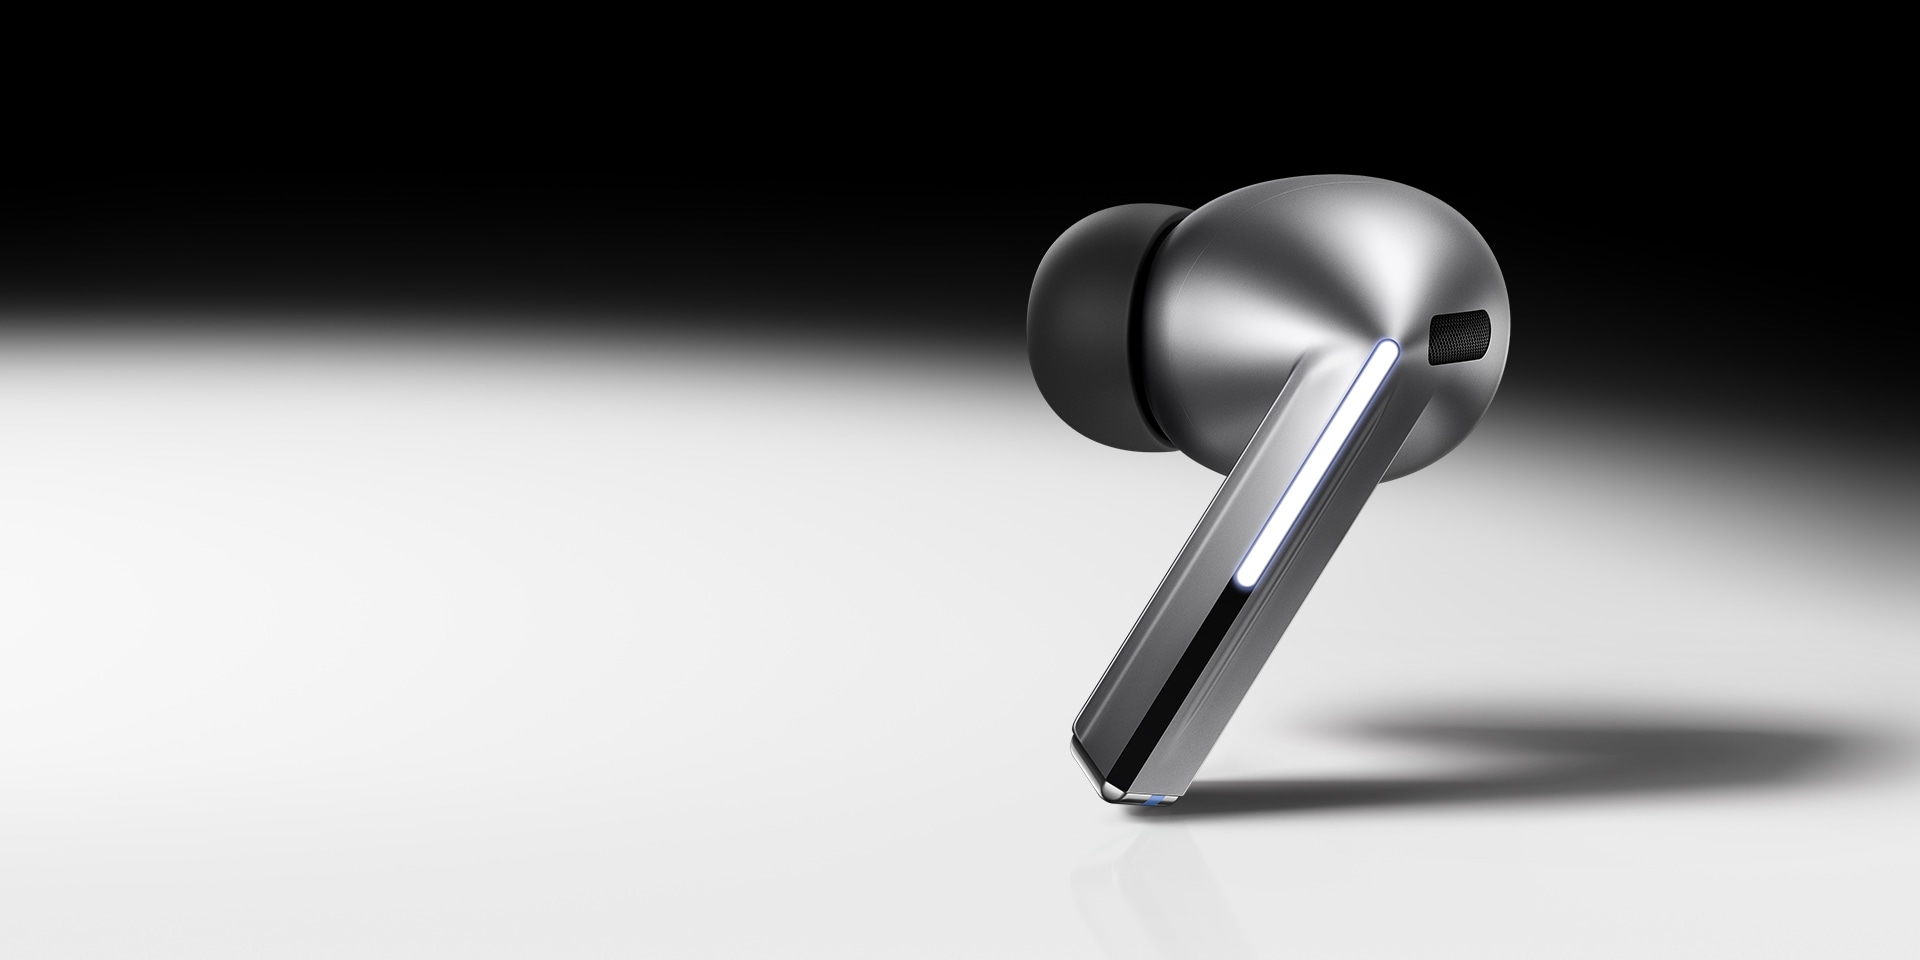 A single, silver coloured Galaxy Buds3 Pro earbud.